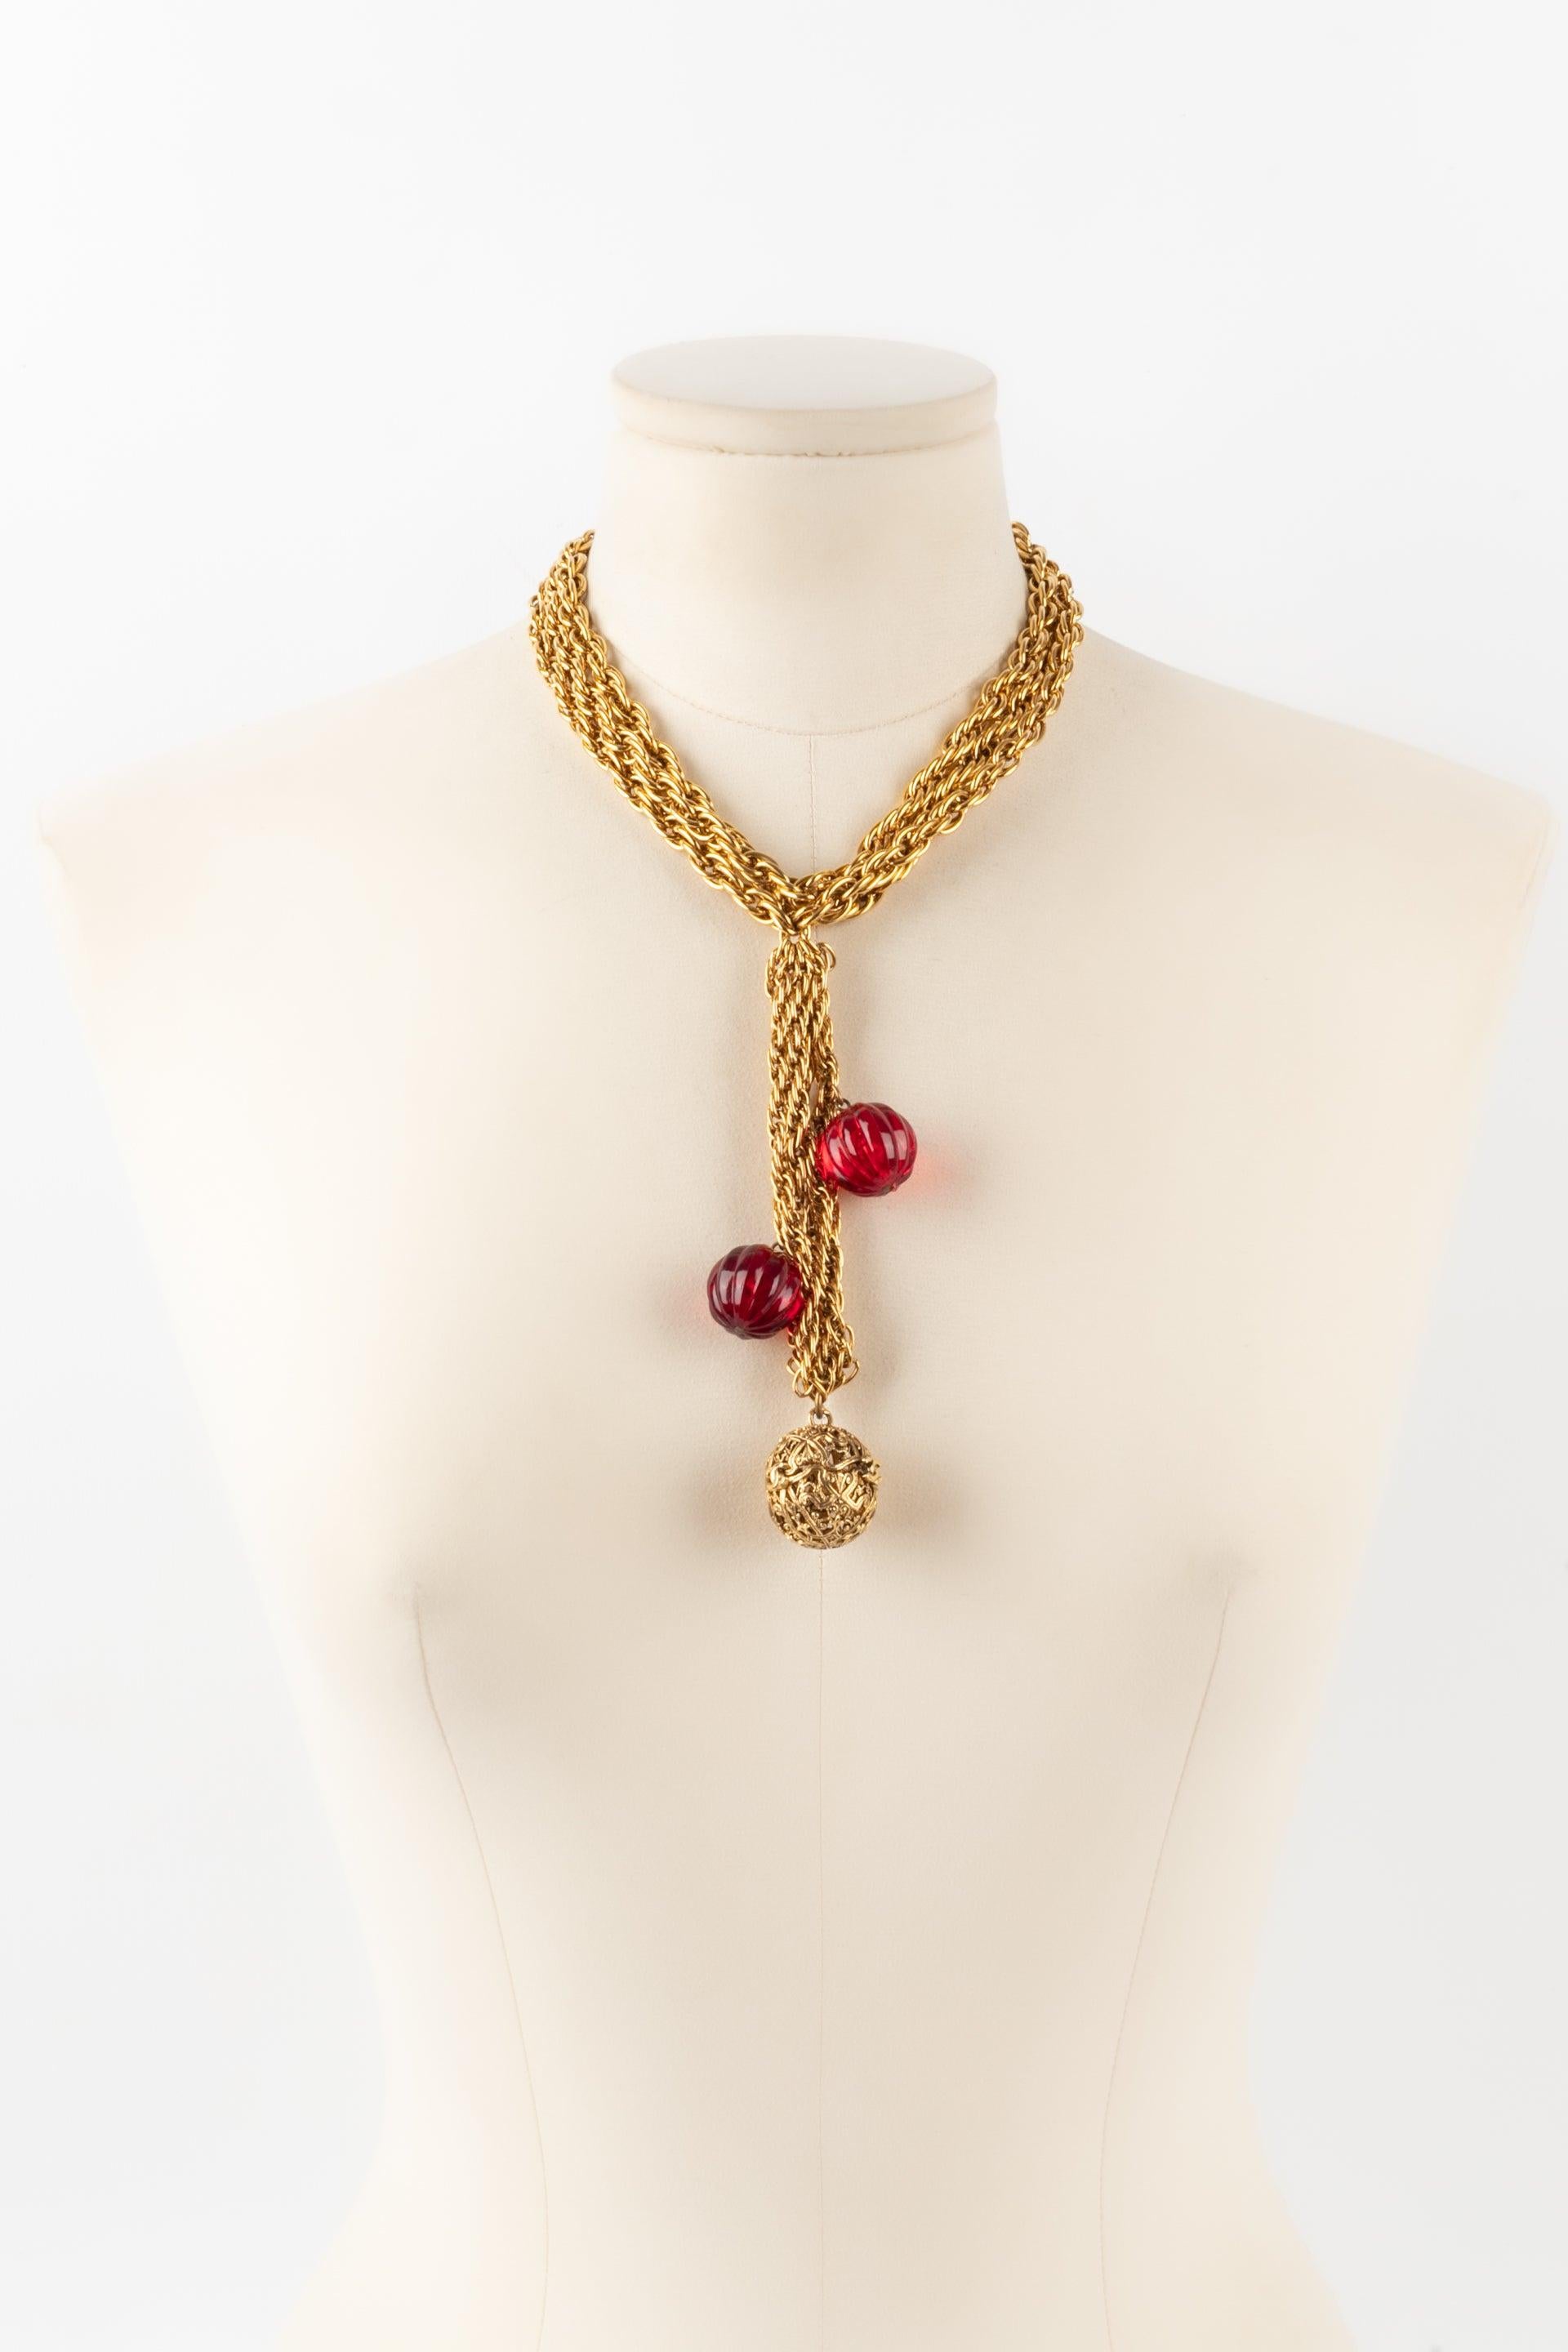 Chanel - (Made in France) Golden metal necklace with red pearls. 1984 Collection.

Additional information:
Condition: Very good condition
Dimensions: Length: 42 cm

Seller Reference: CB208